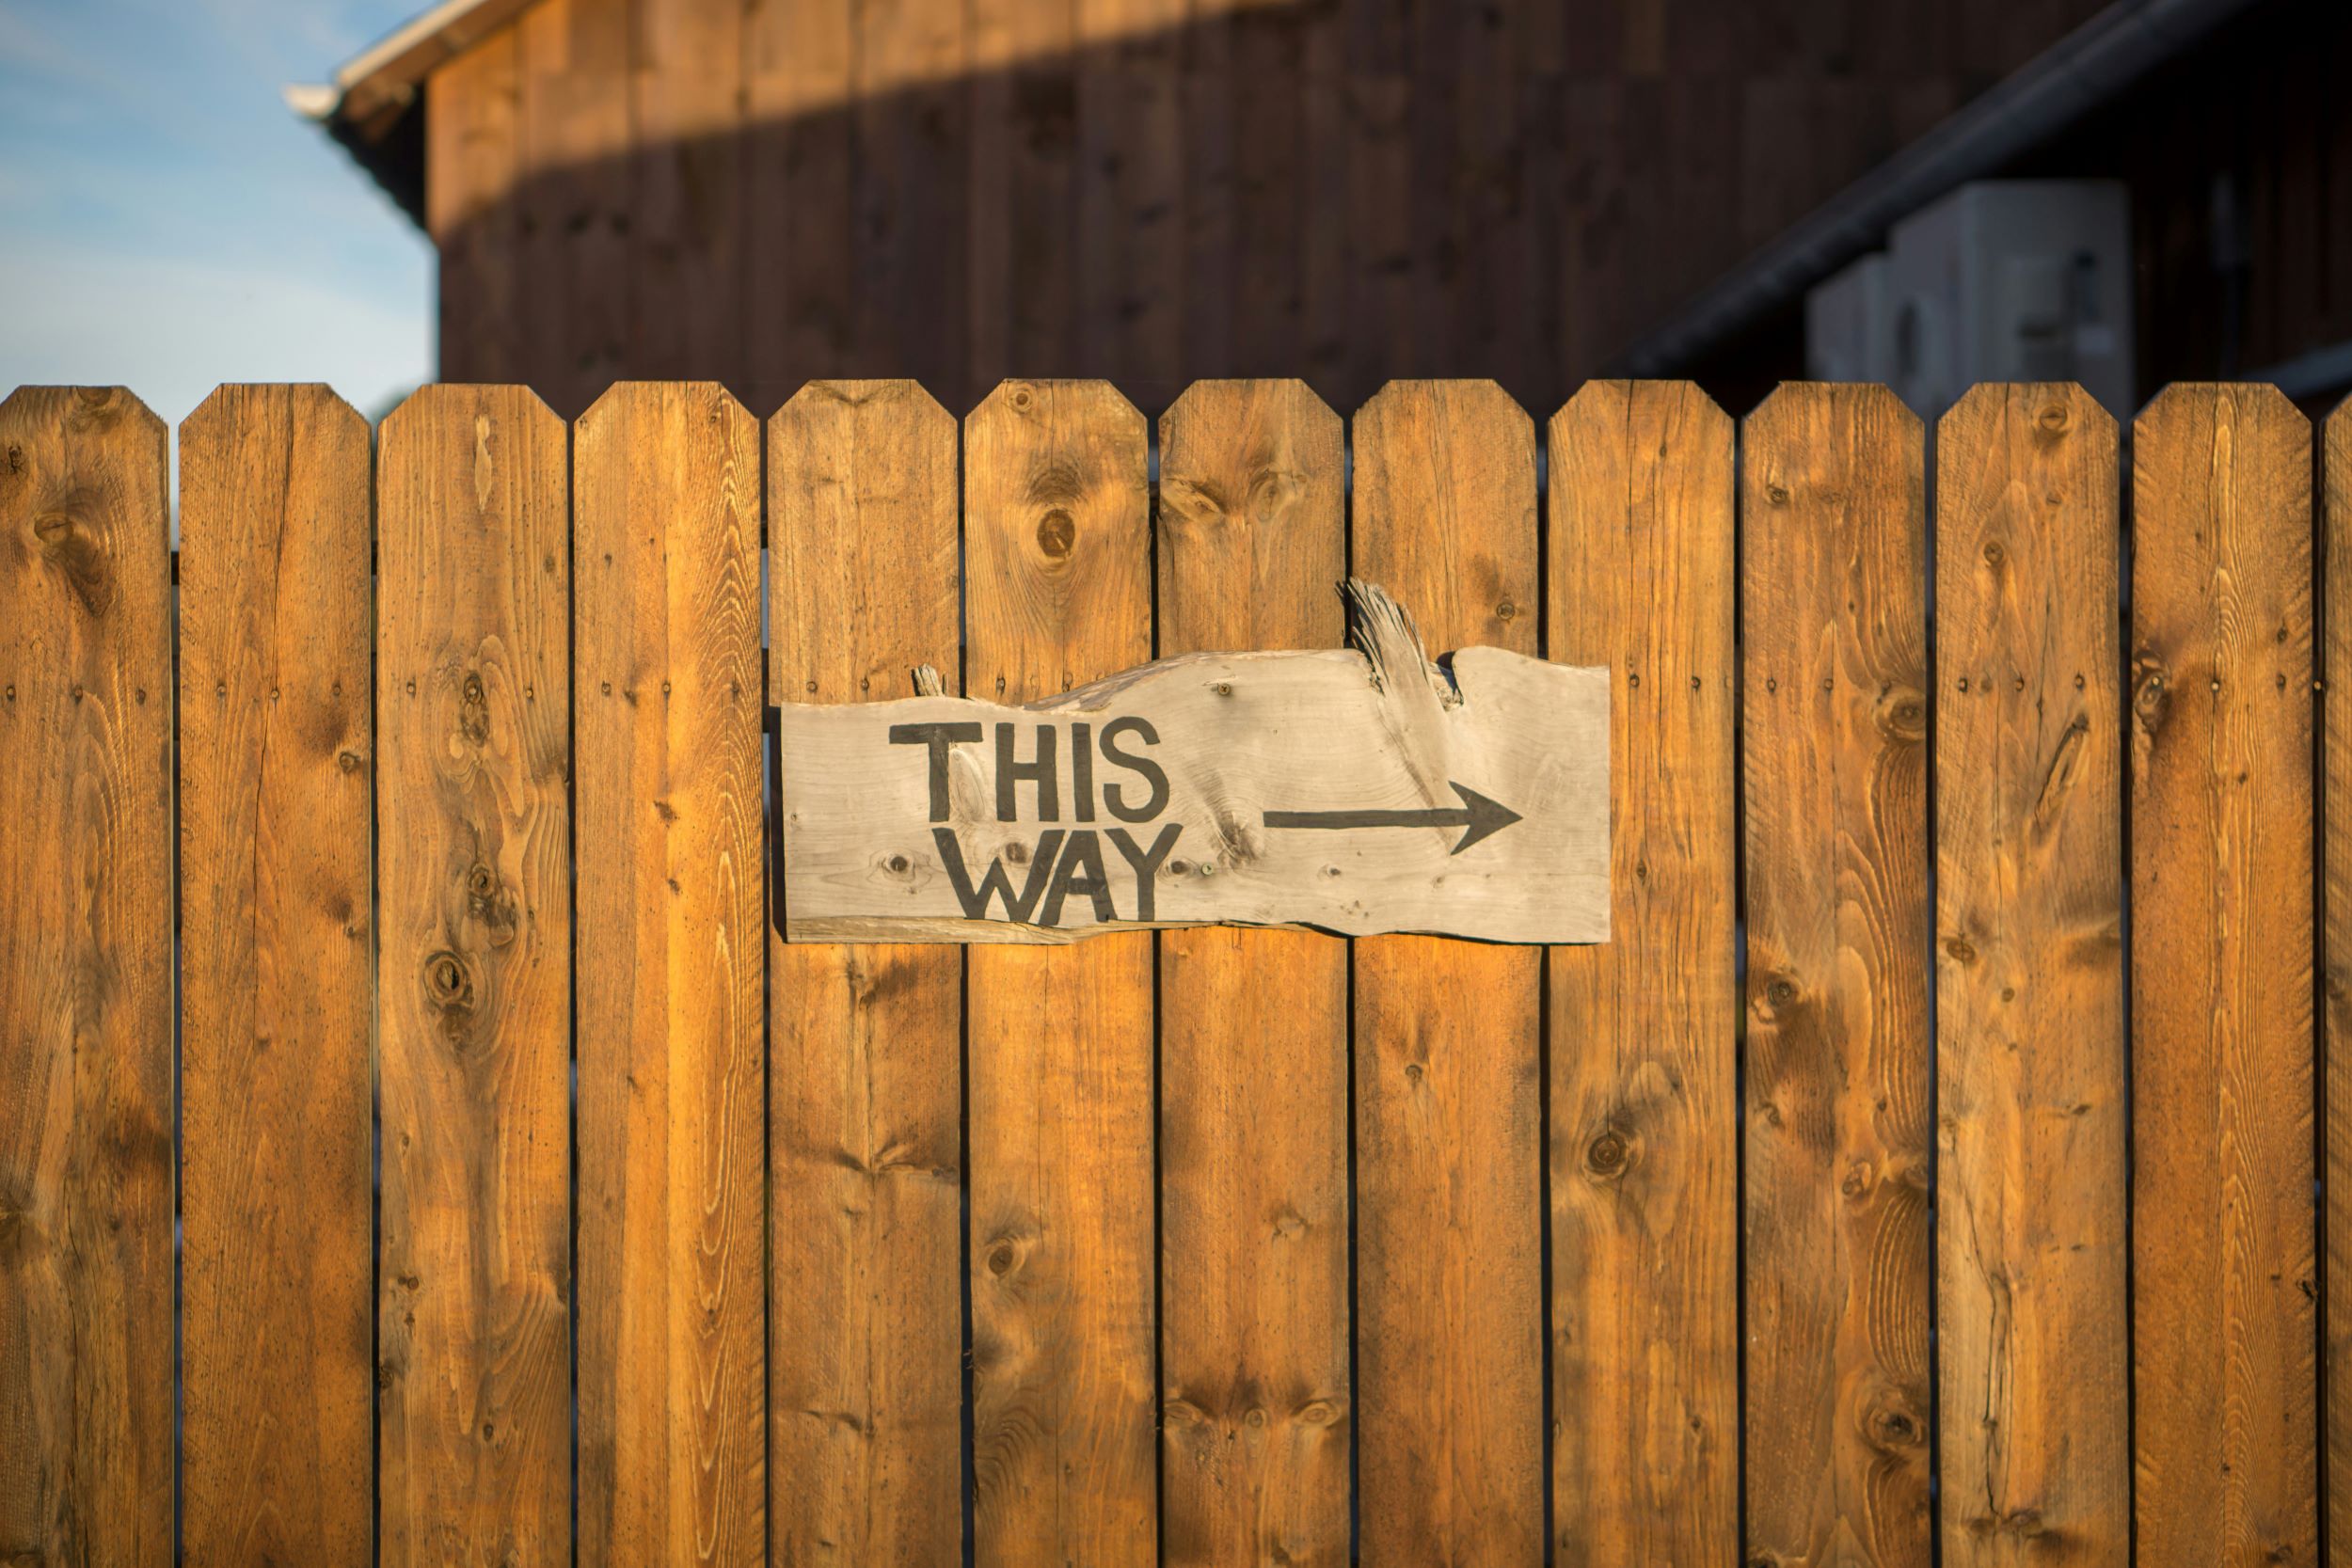 fence with sign that says "this way"